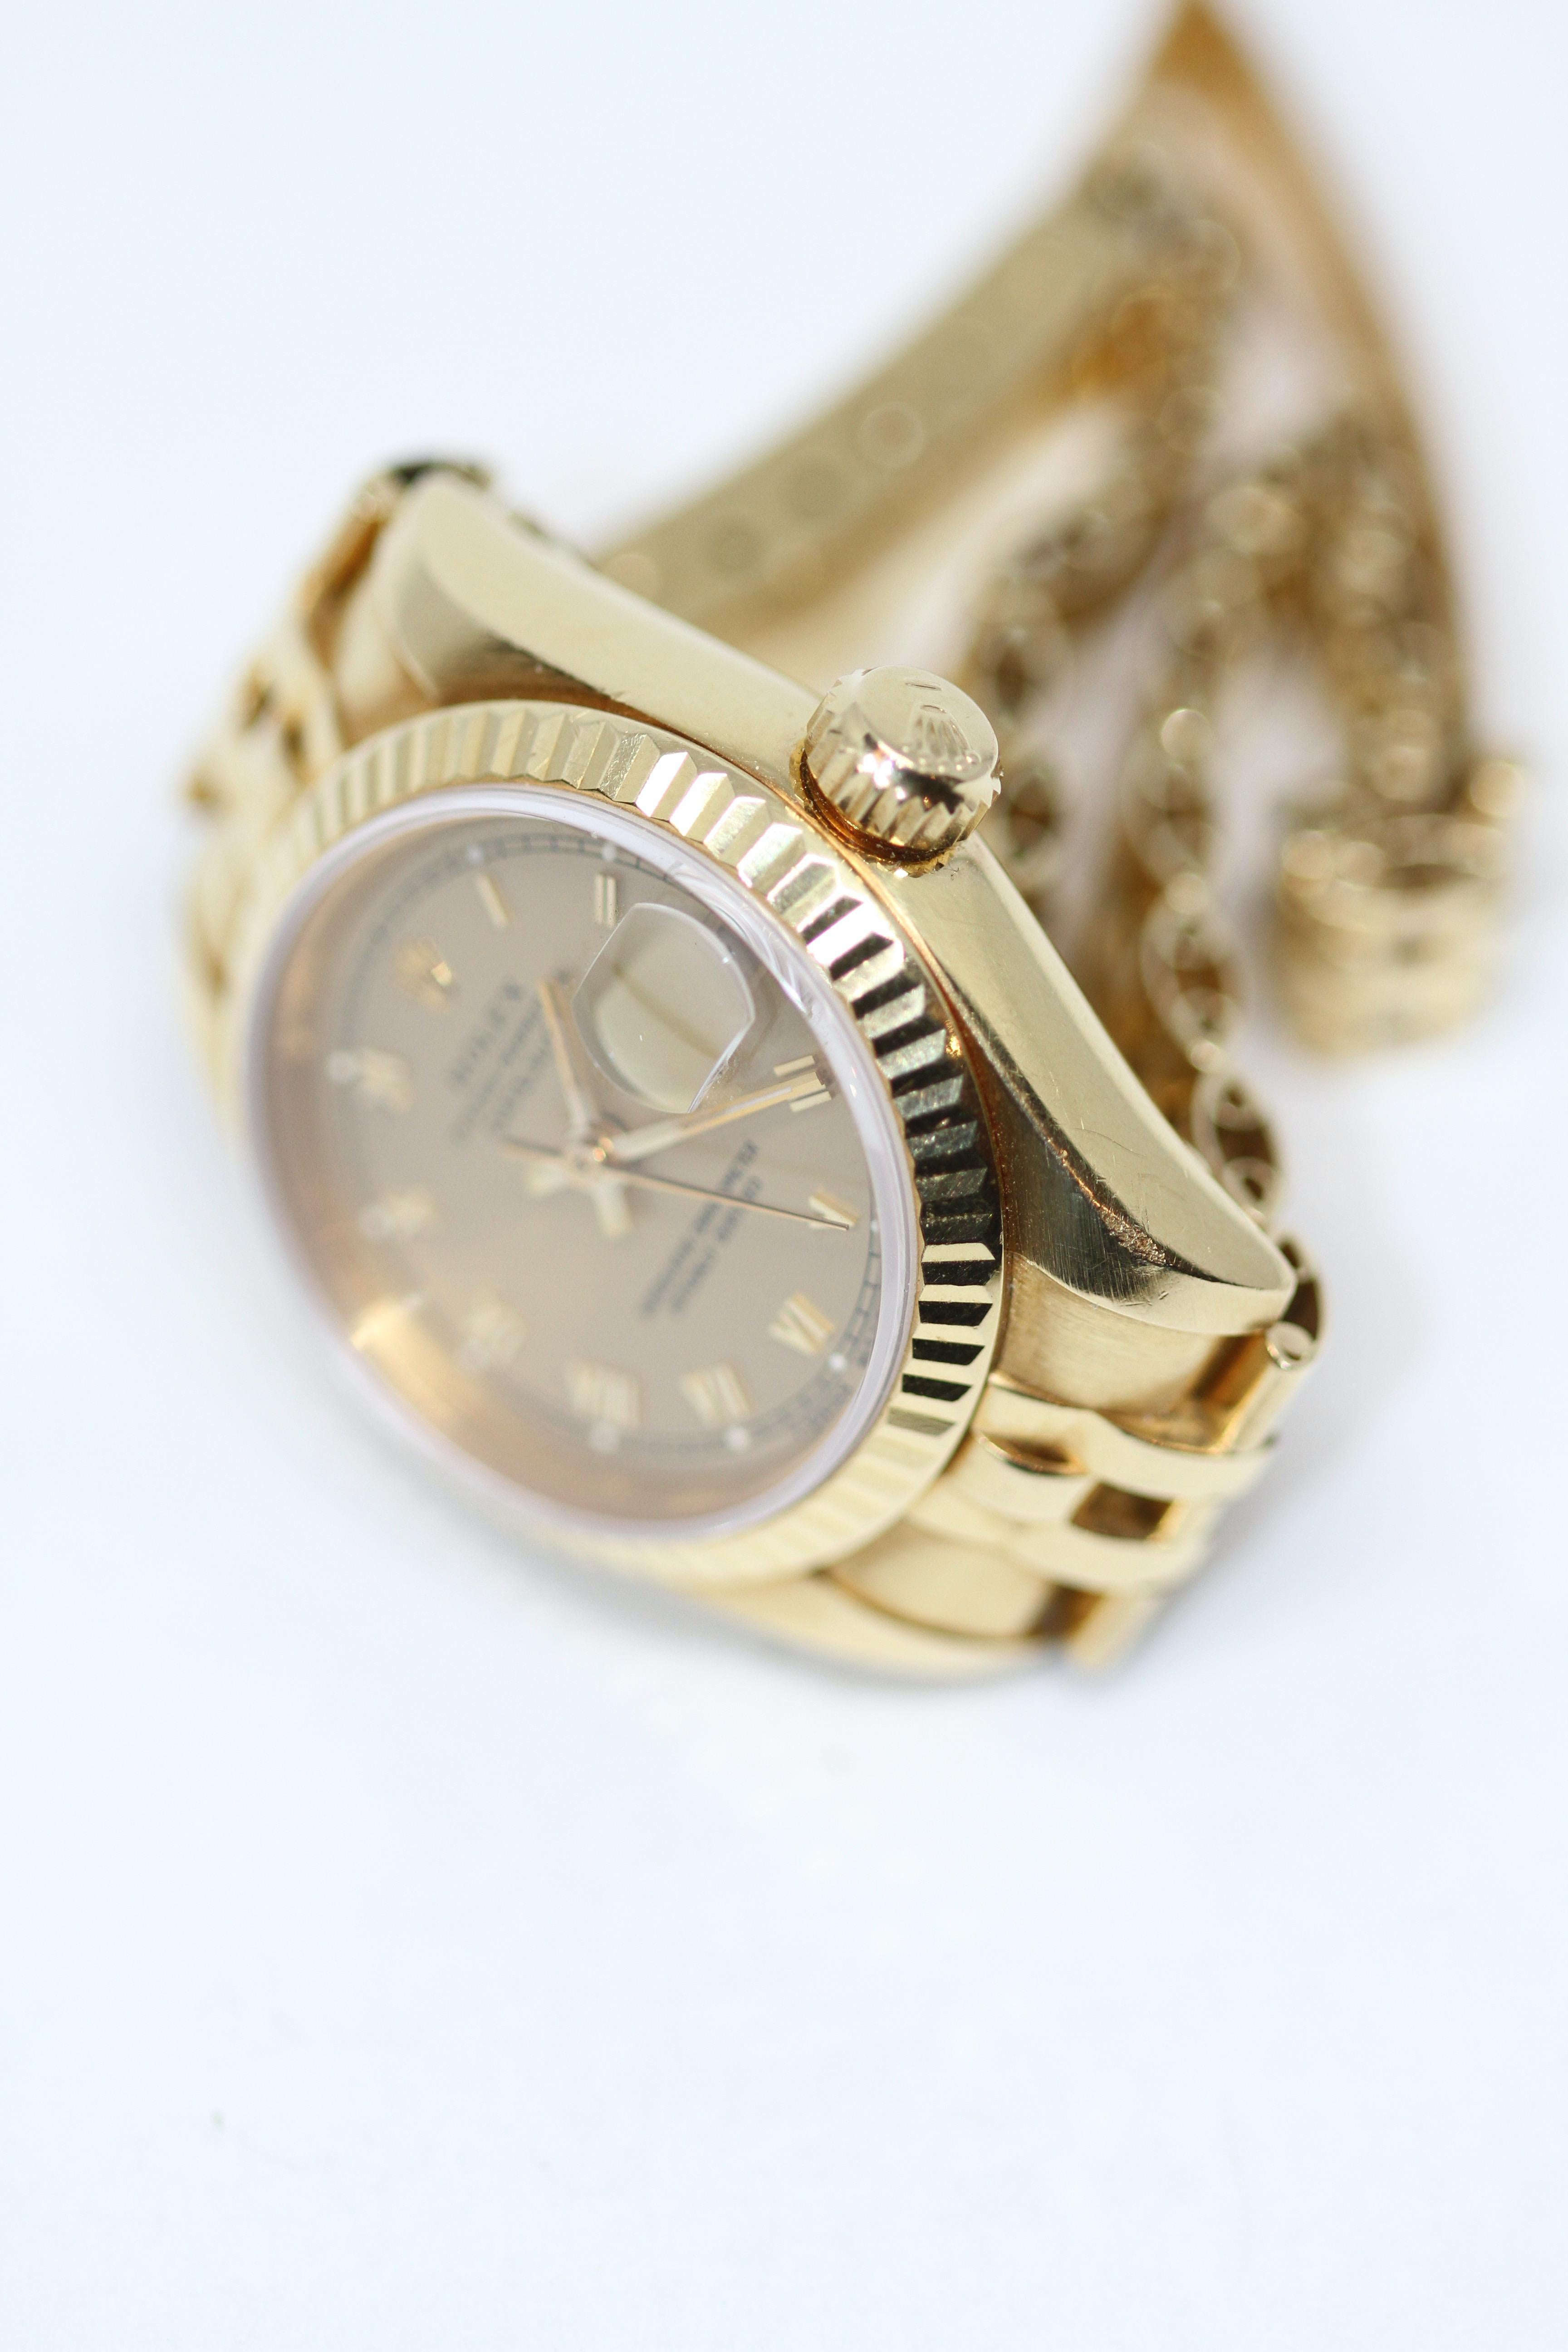 Rolex Oyster Perpetual Date Just Lady 18K Gold Watch 2